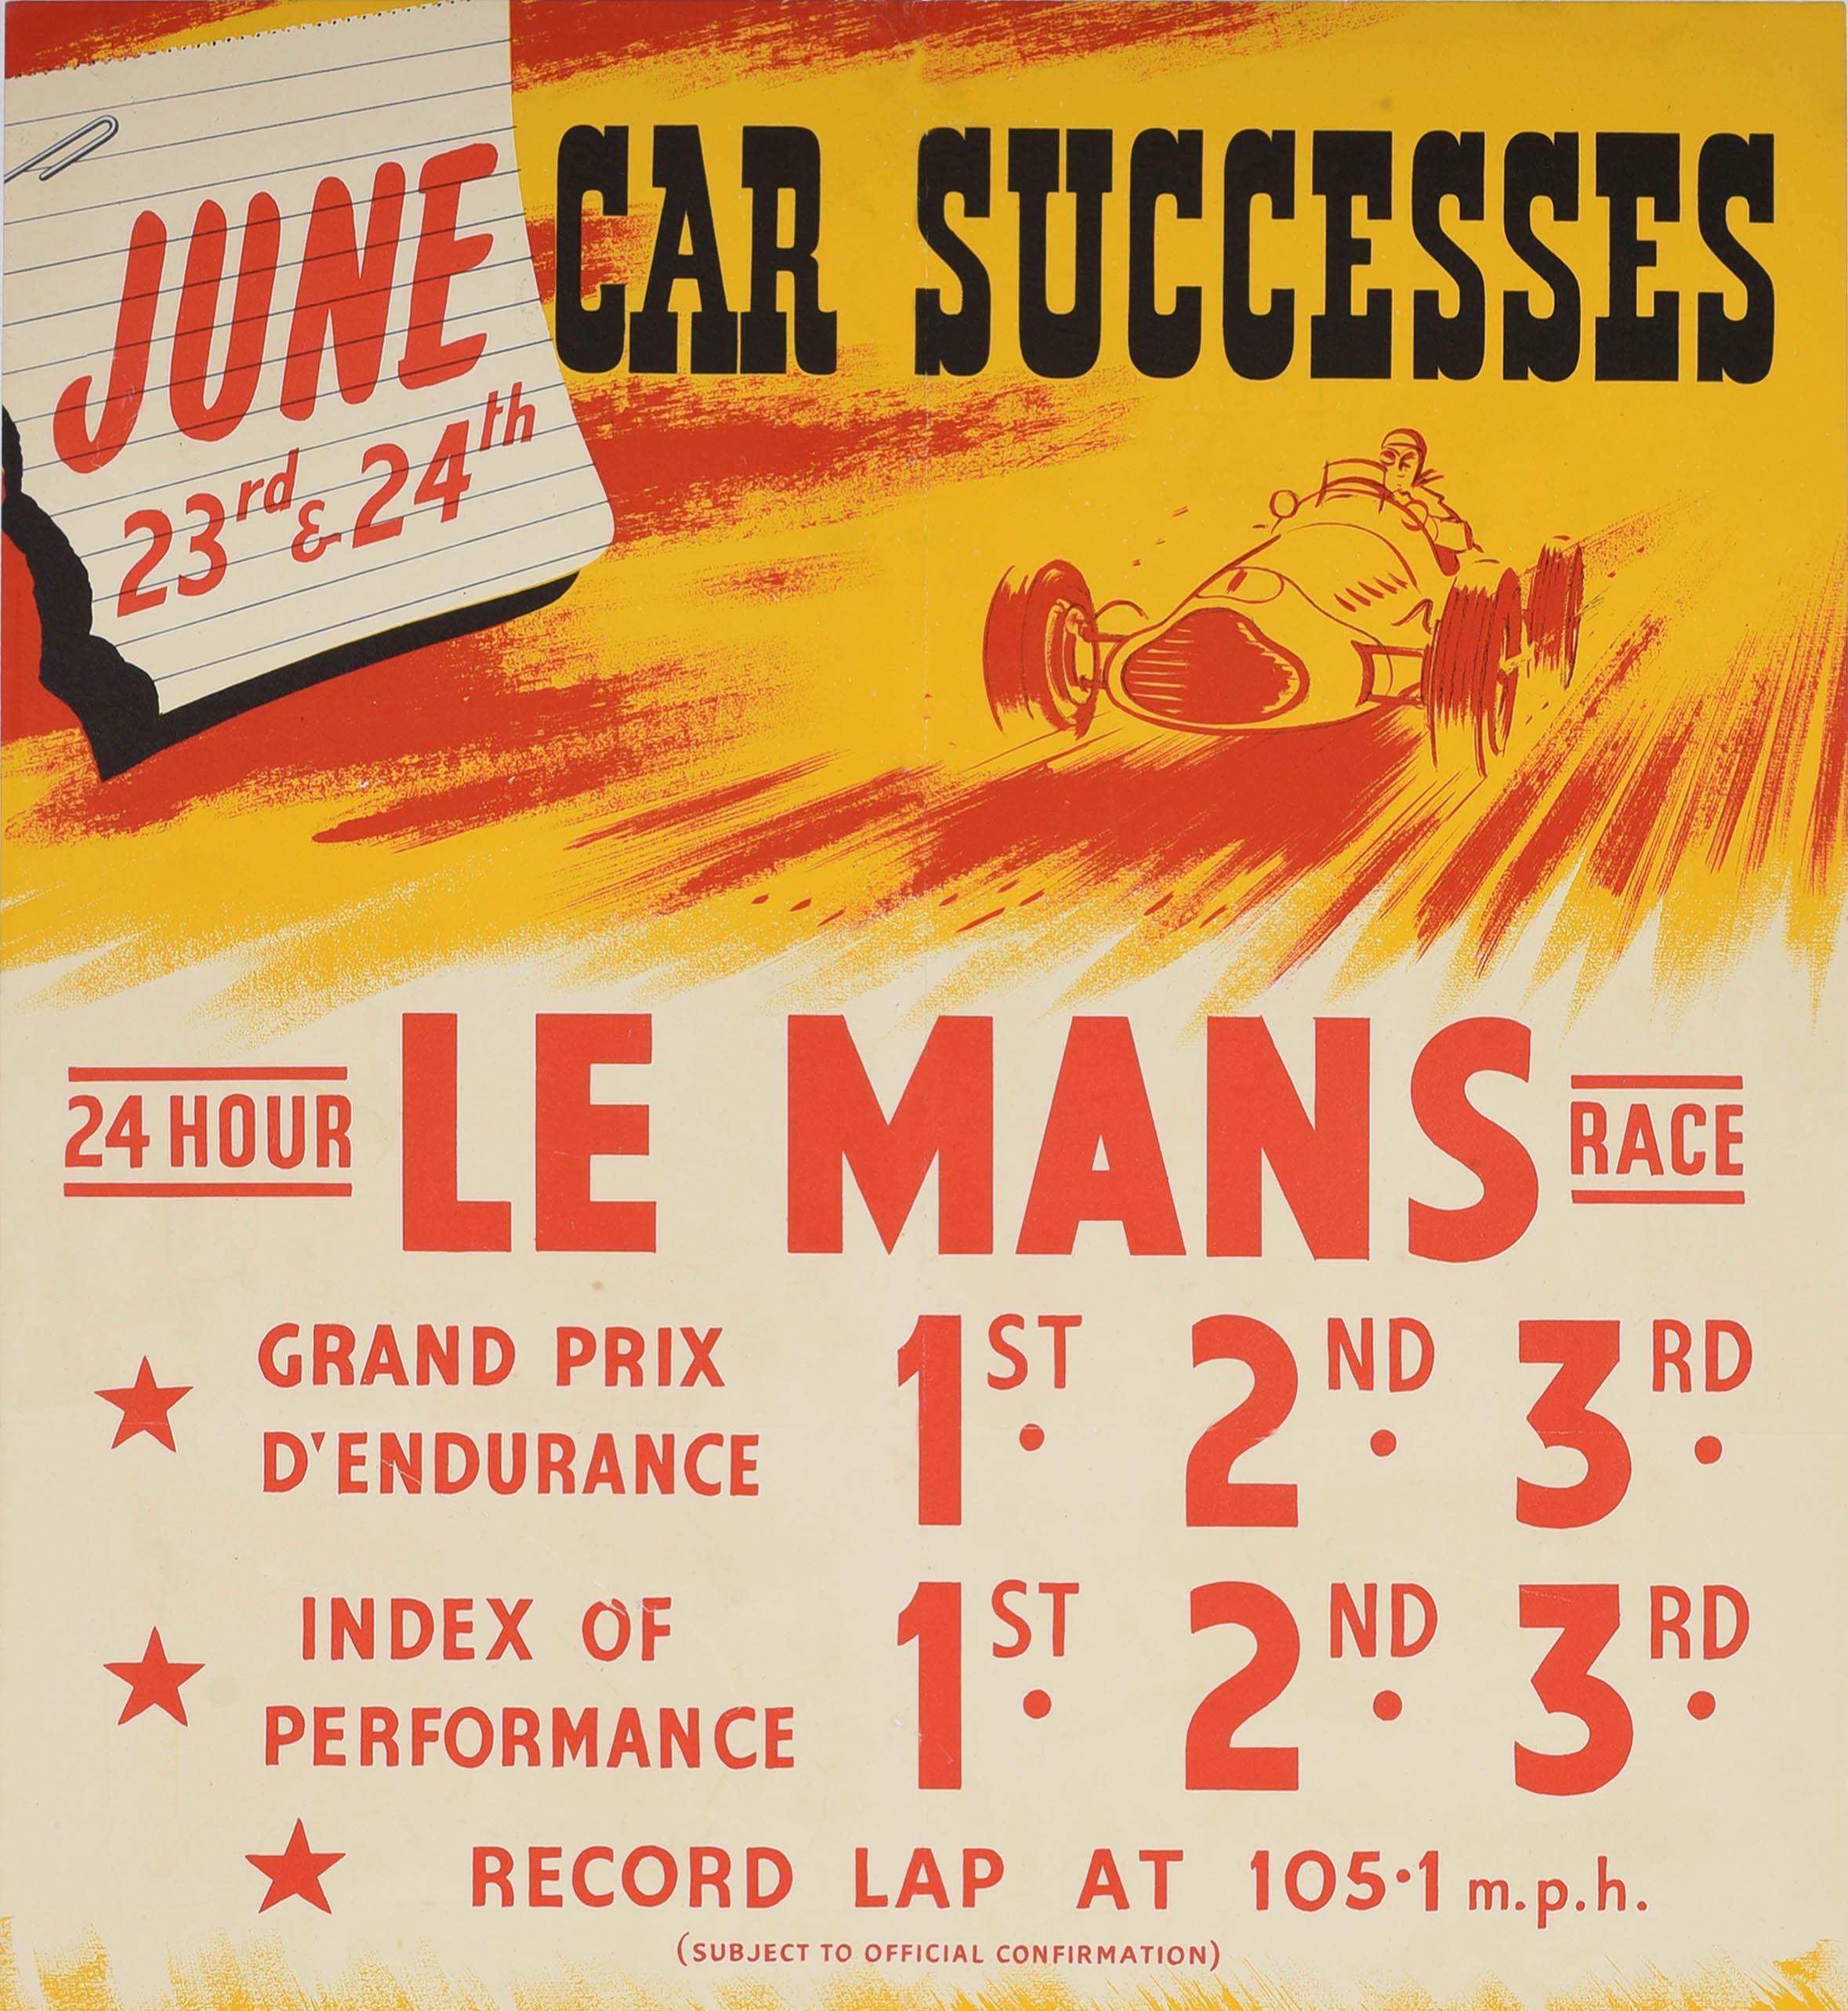 Original vintage motorsport sponsorship poster celebrating the Car Successes 24 Hour Le Mans Race 1st Dunlop featuring a dynamic red and yellow illustration of a classic racing car speeding towards the viewer with the victory in the races on 23 and